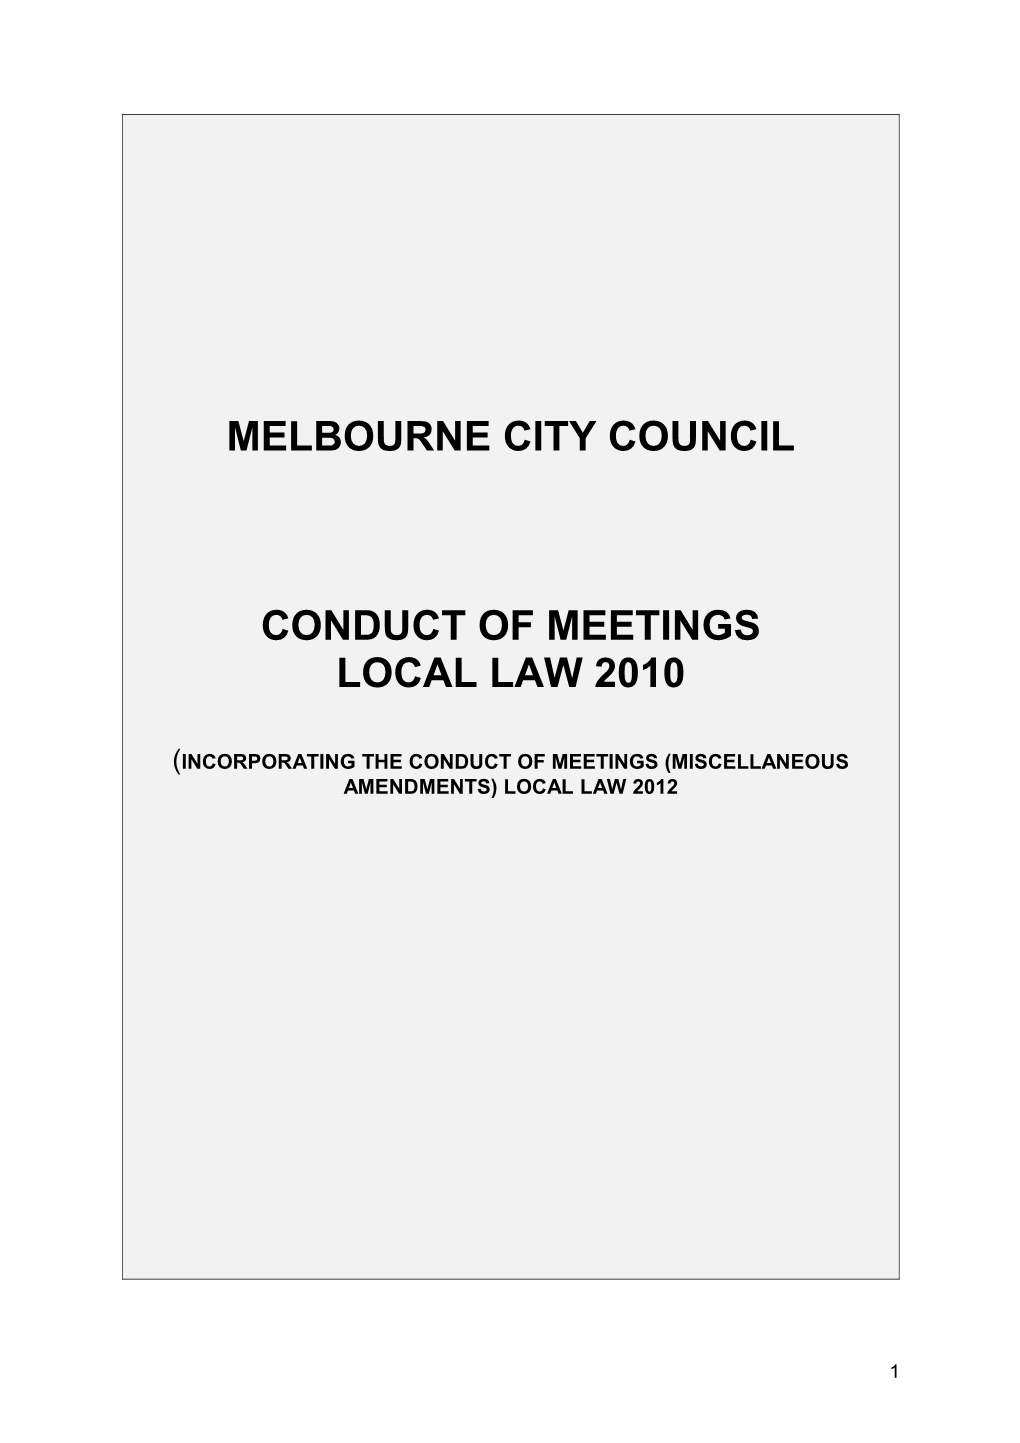 Conduct of Meetings Local Law 2010 (Consolidated)